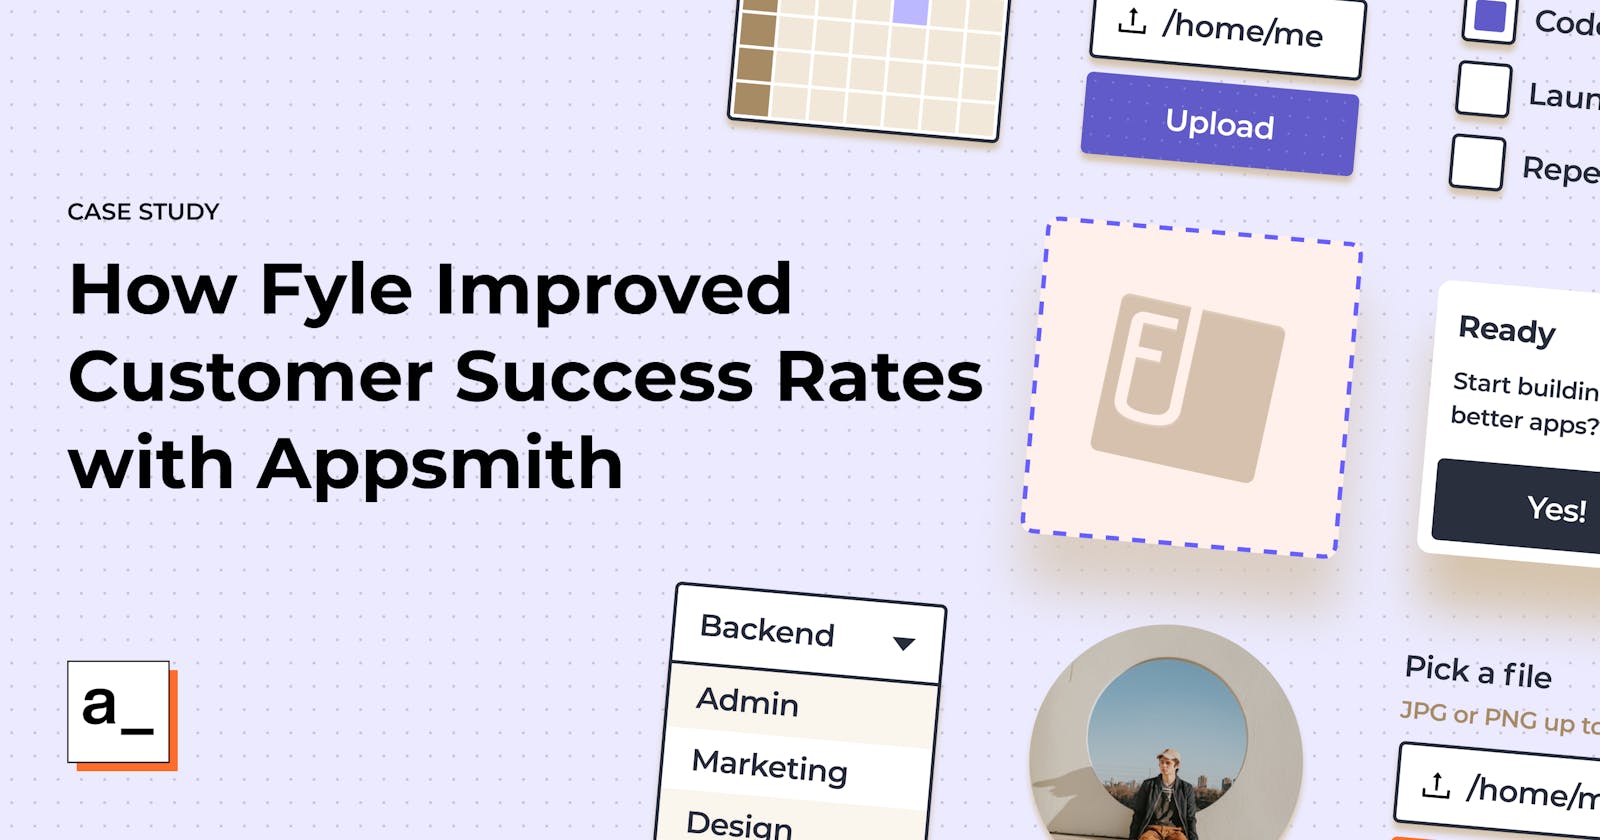 How Tiger Global funded Fyle Empowered Their Customer Success Team with Appsmith